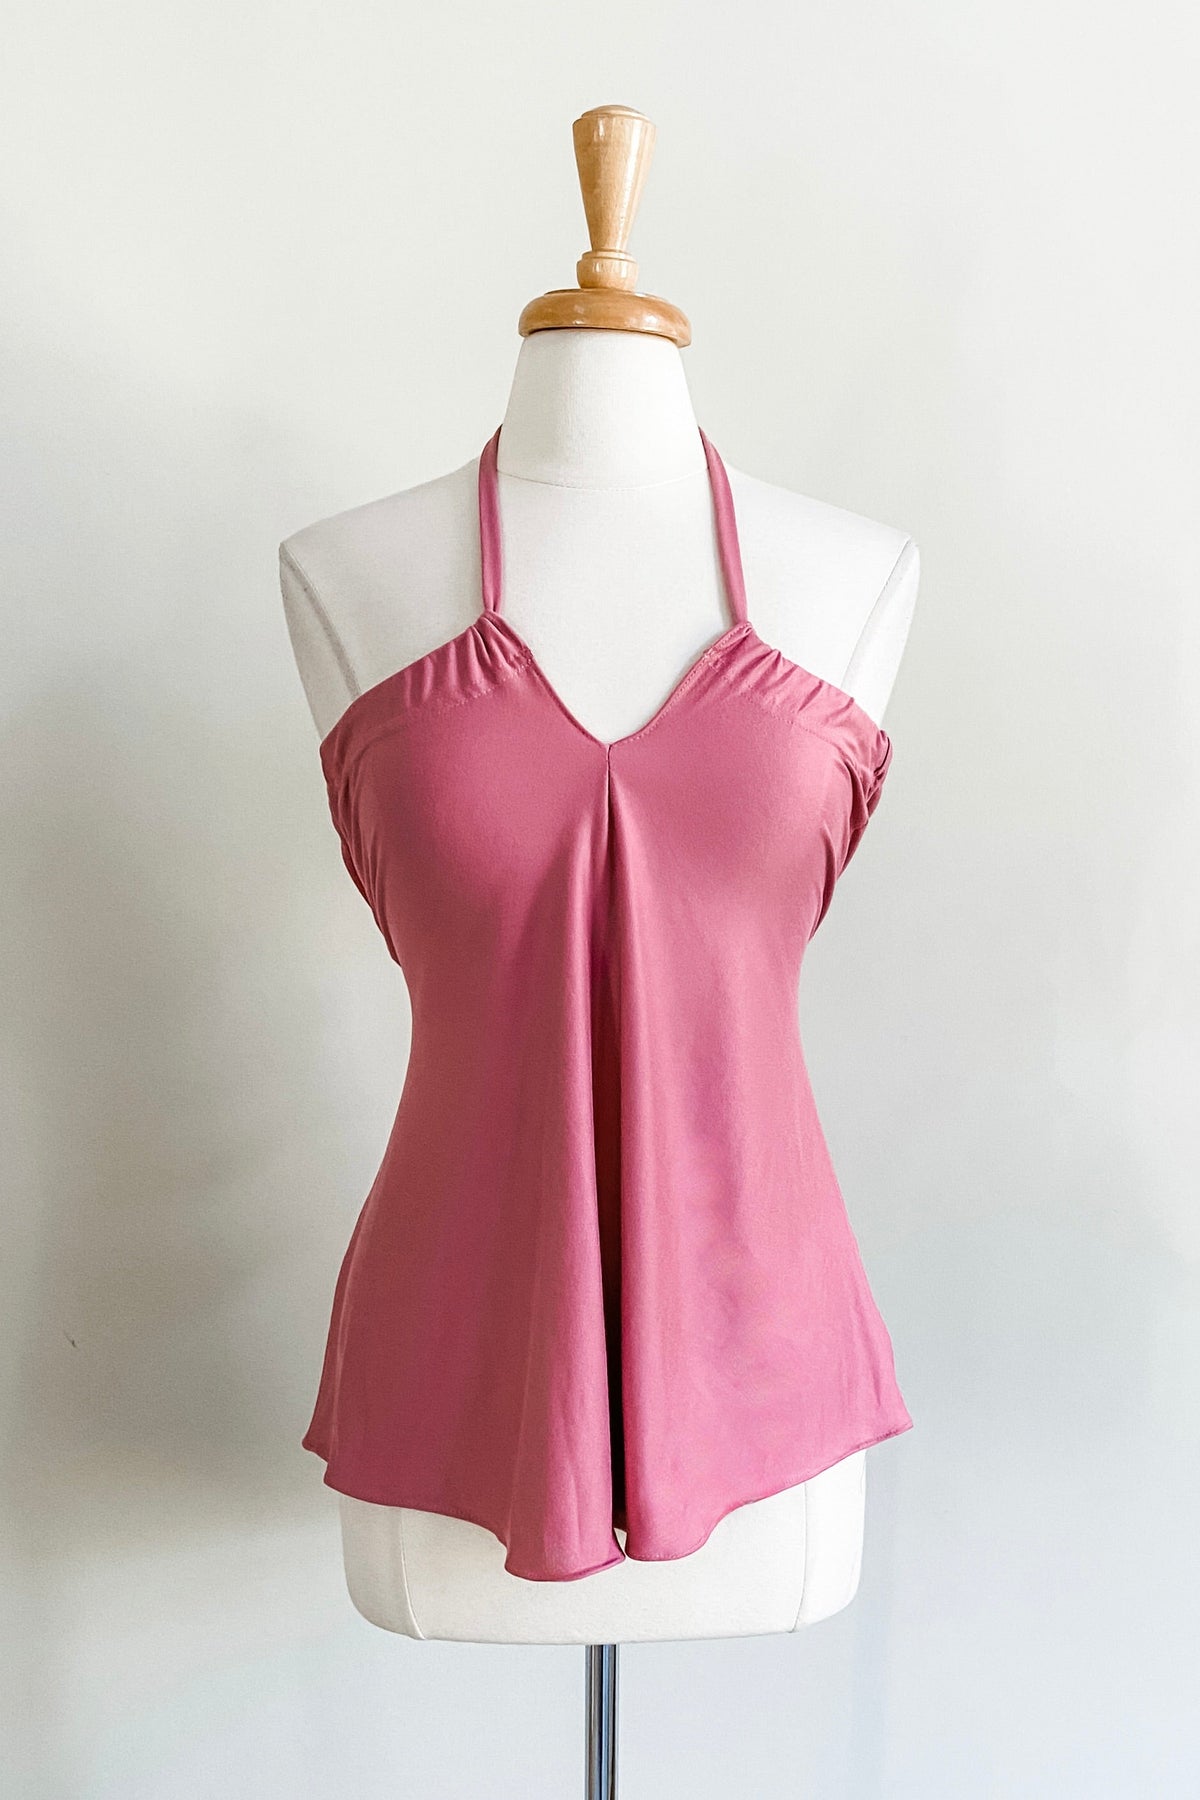 Diane Kroe Evermore Top (Rose) - The Classic Capsule Collection